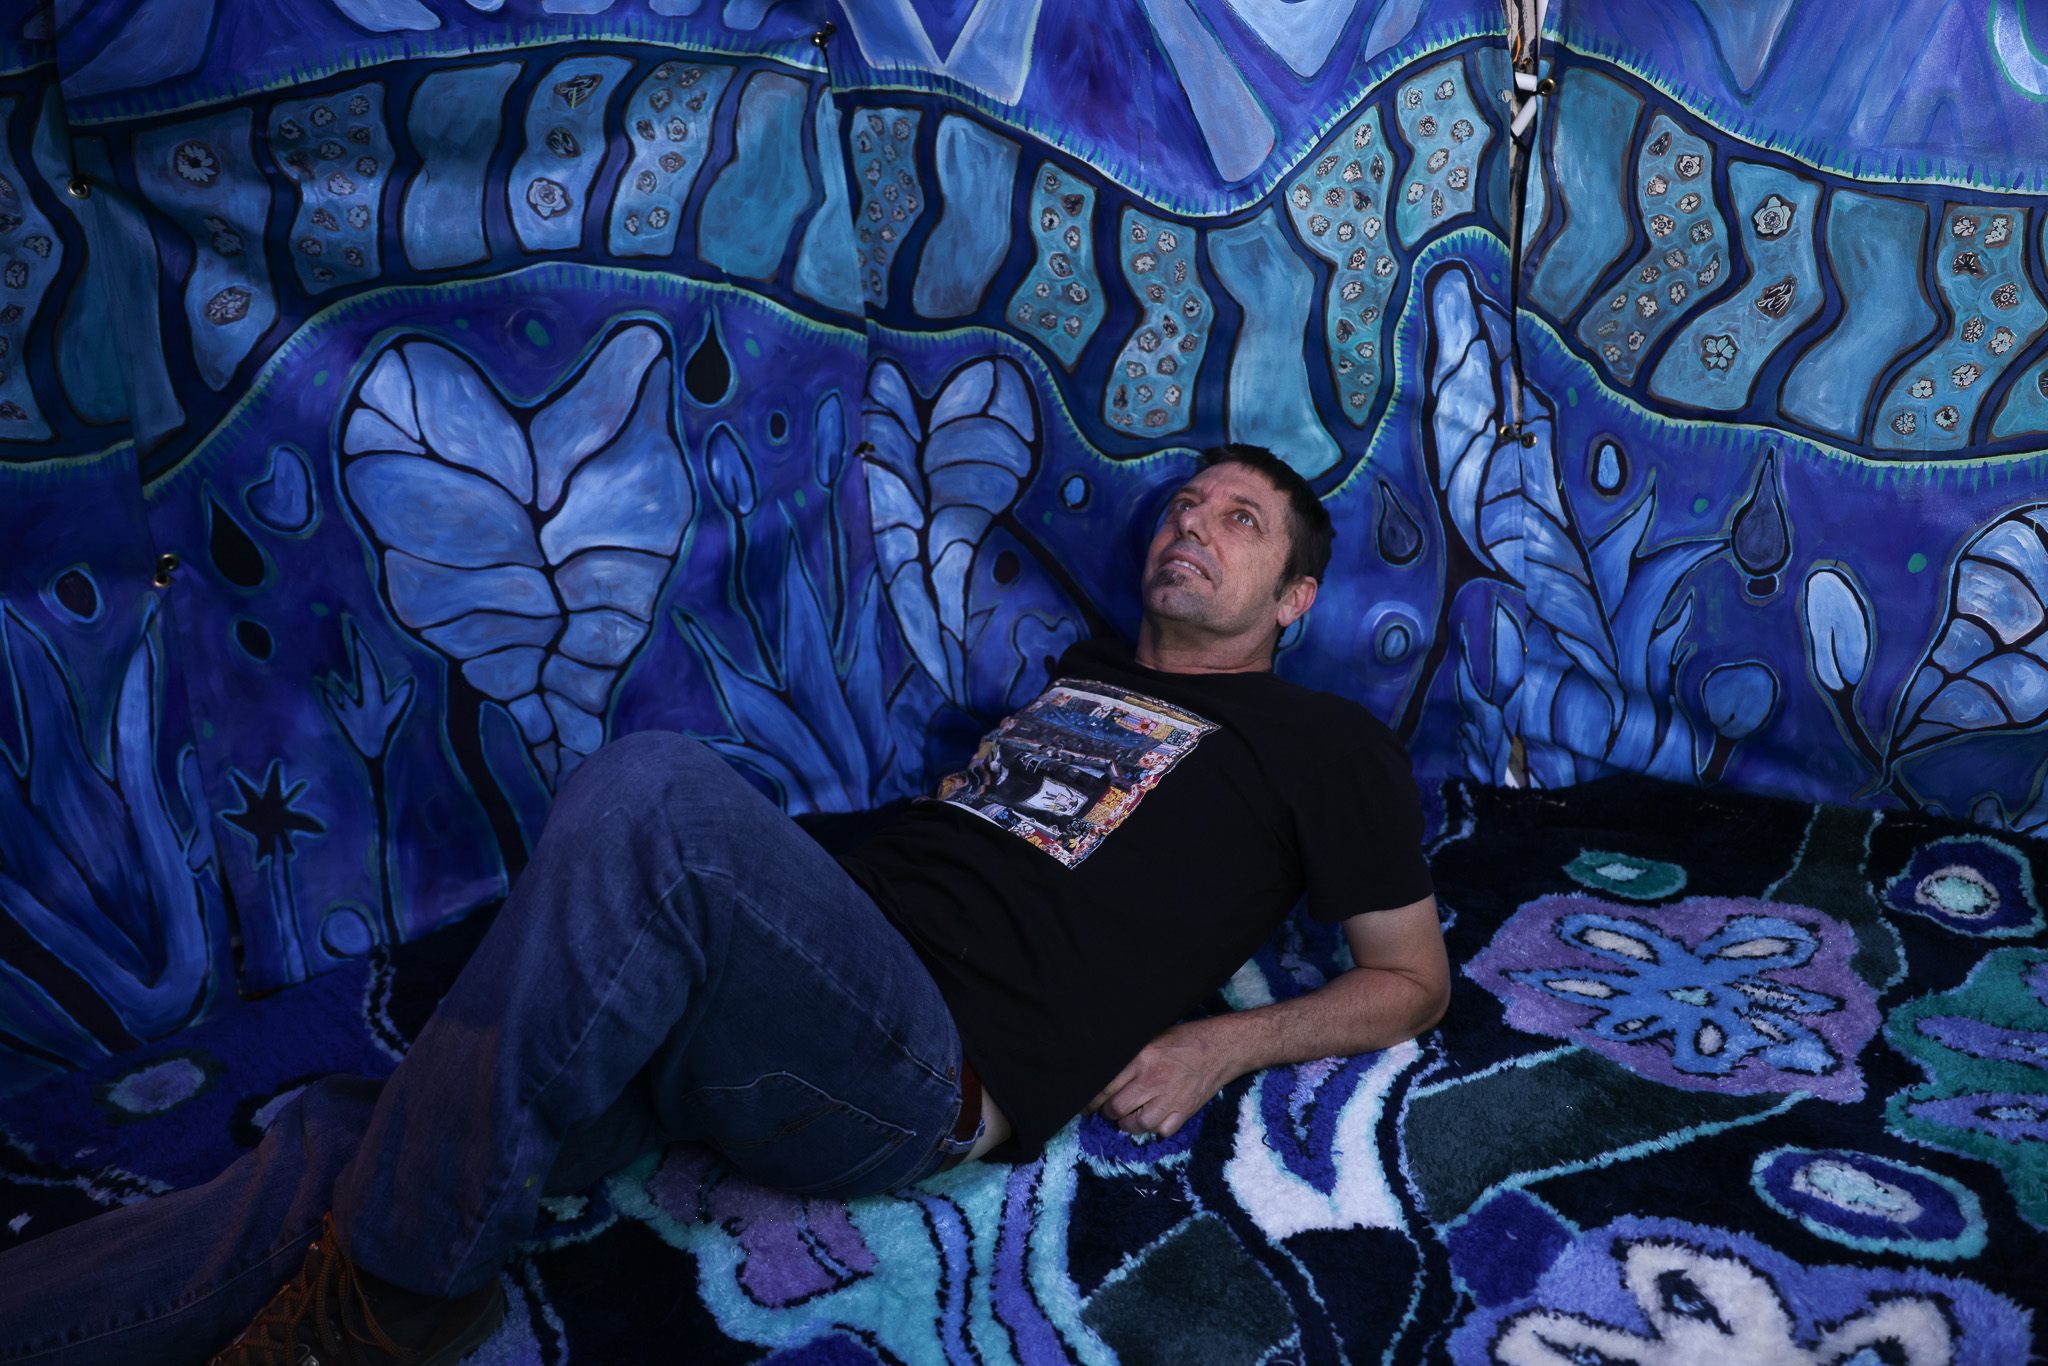 A man in a black T-shirt and jeans lies on a colorful, patterned carpet with his head resting against a vibrant blue wall adorned with abstract designs.